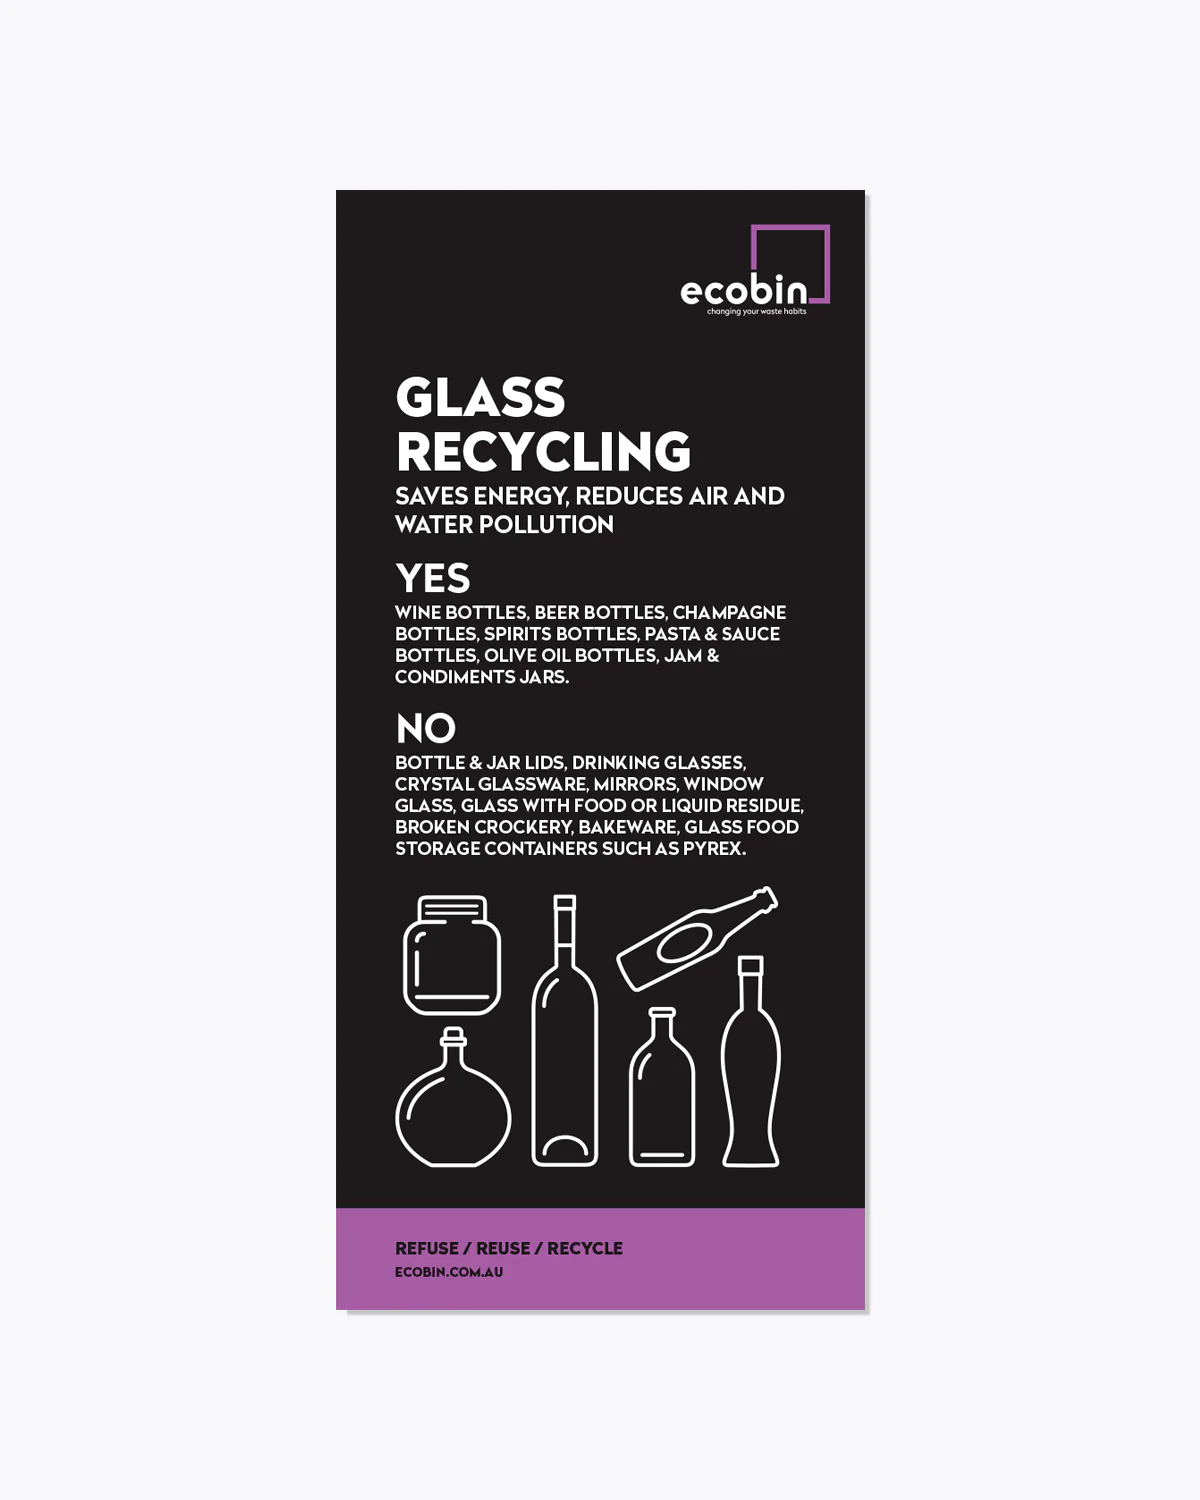 Glass Recycling Educational Poster | Image Design